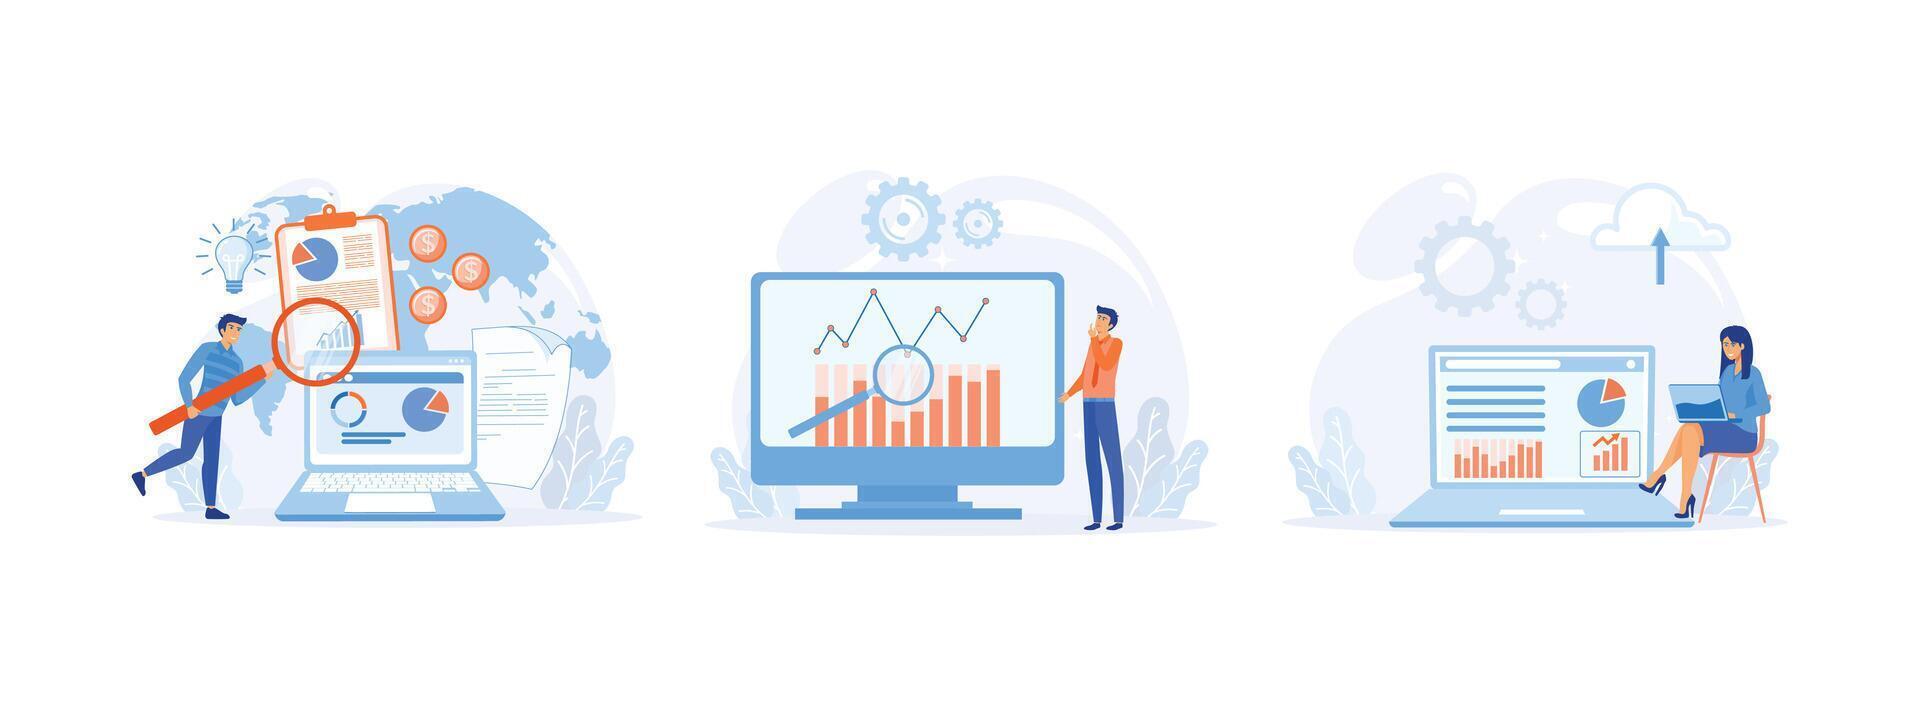 illustration with various items and symbols, enterprise strategy developmen, obtaining analytical information for making strategic business decisions. vector